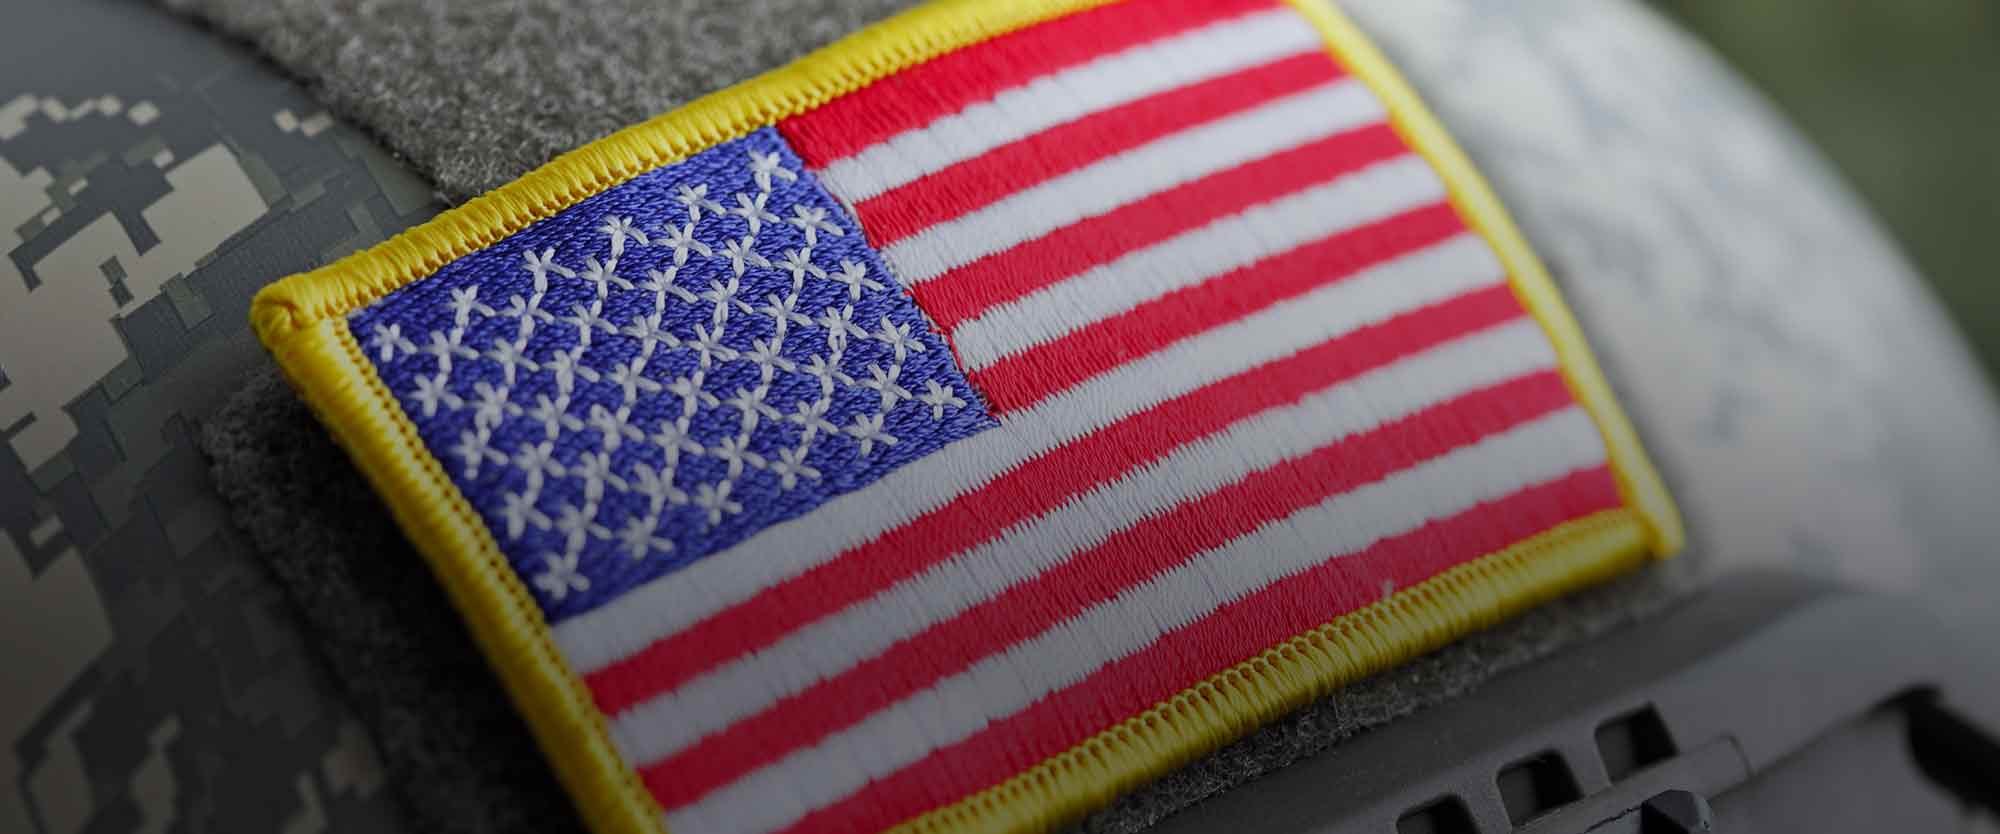 US flag patch on a military helmet